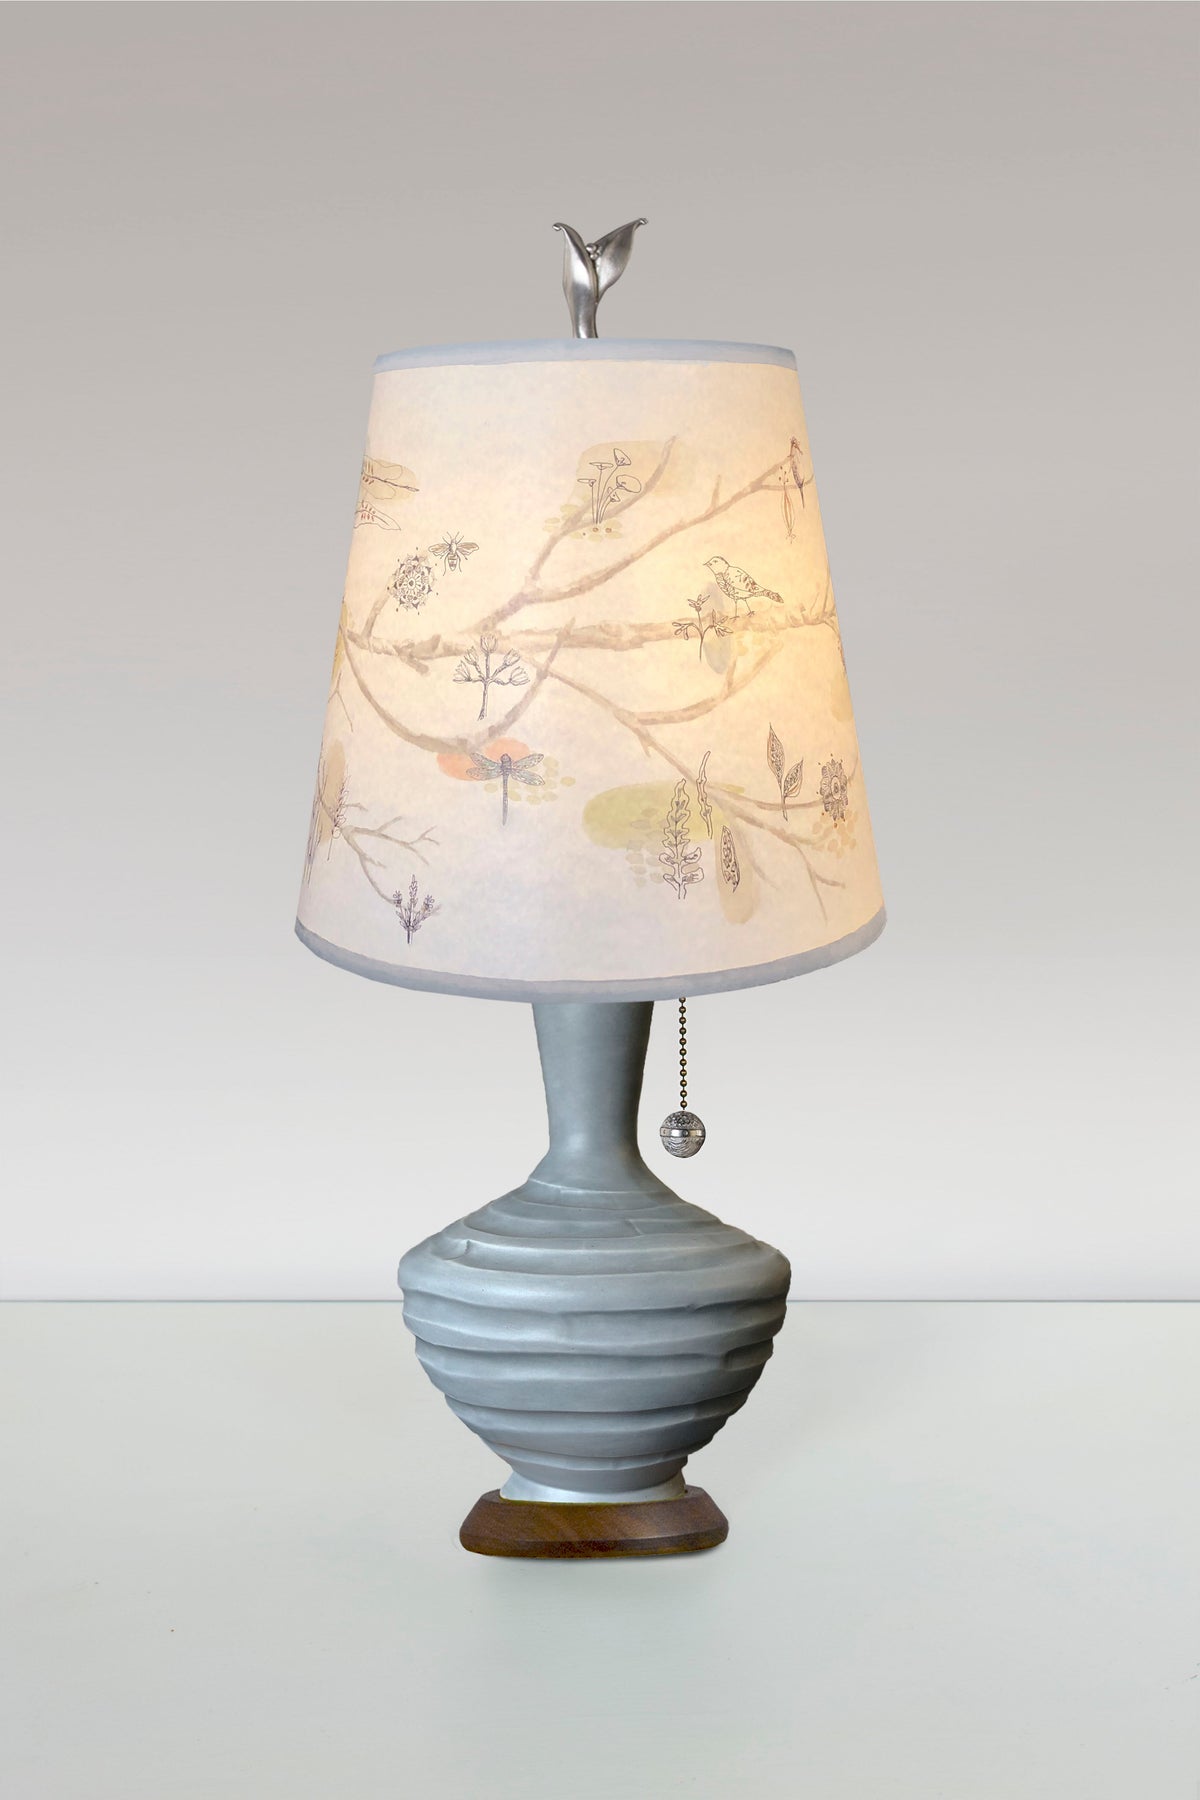 Ceramic Table Lamp with Small Drum Shade in Artful Branch